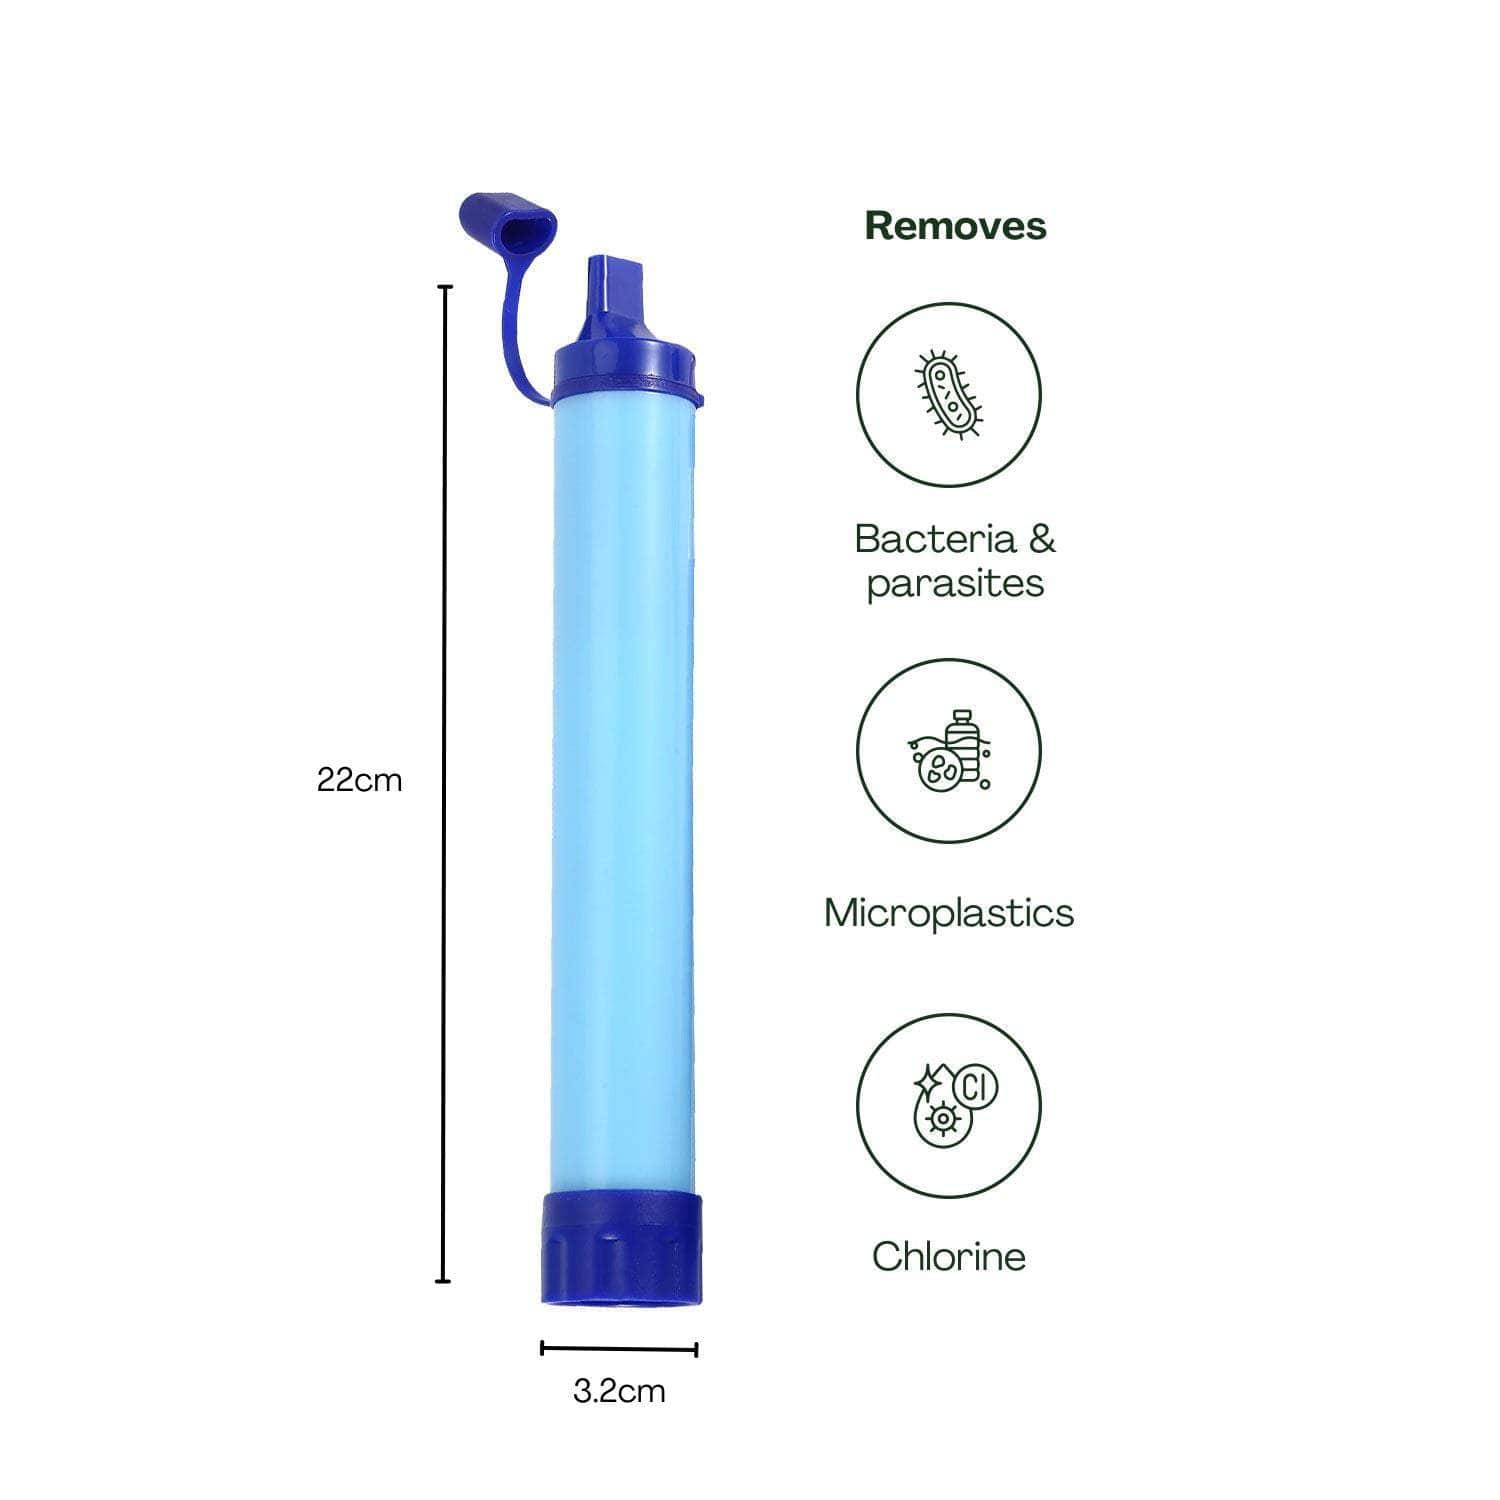 Ultralight & Durable Water Filter - 1500L Capacity, Easy to Carry & Long-Lasting